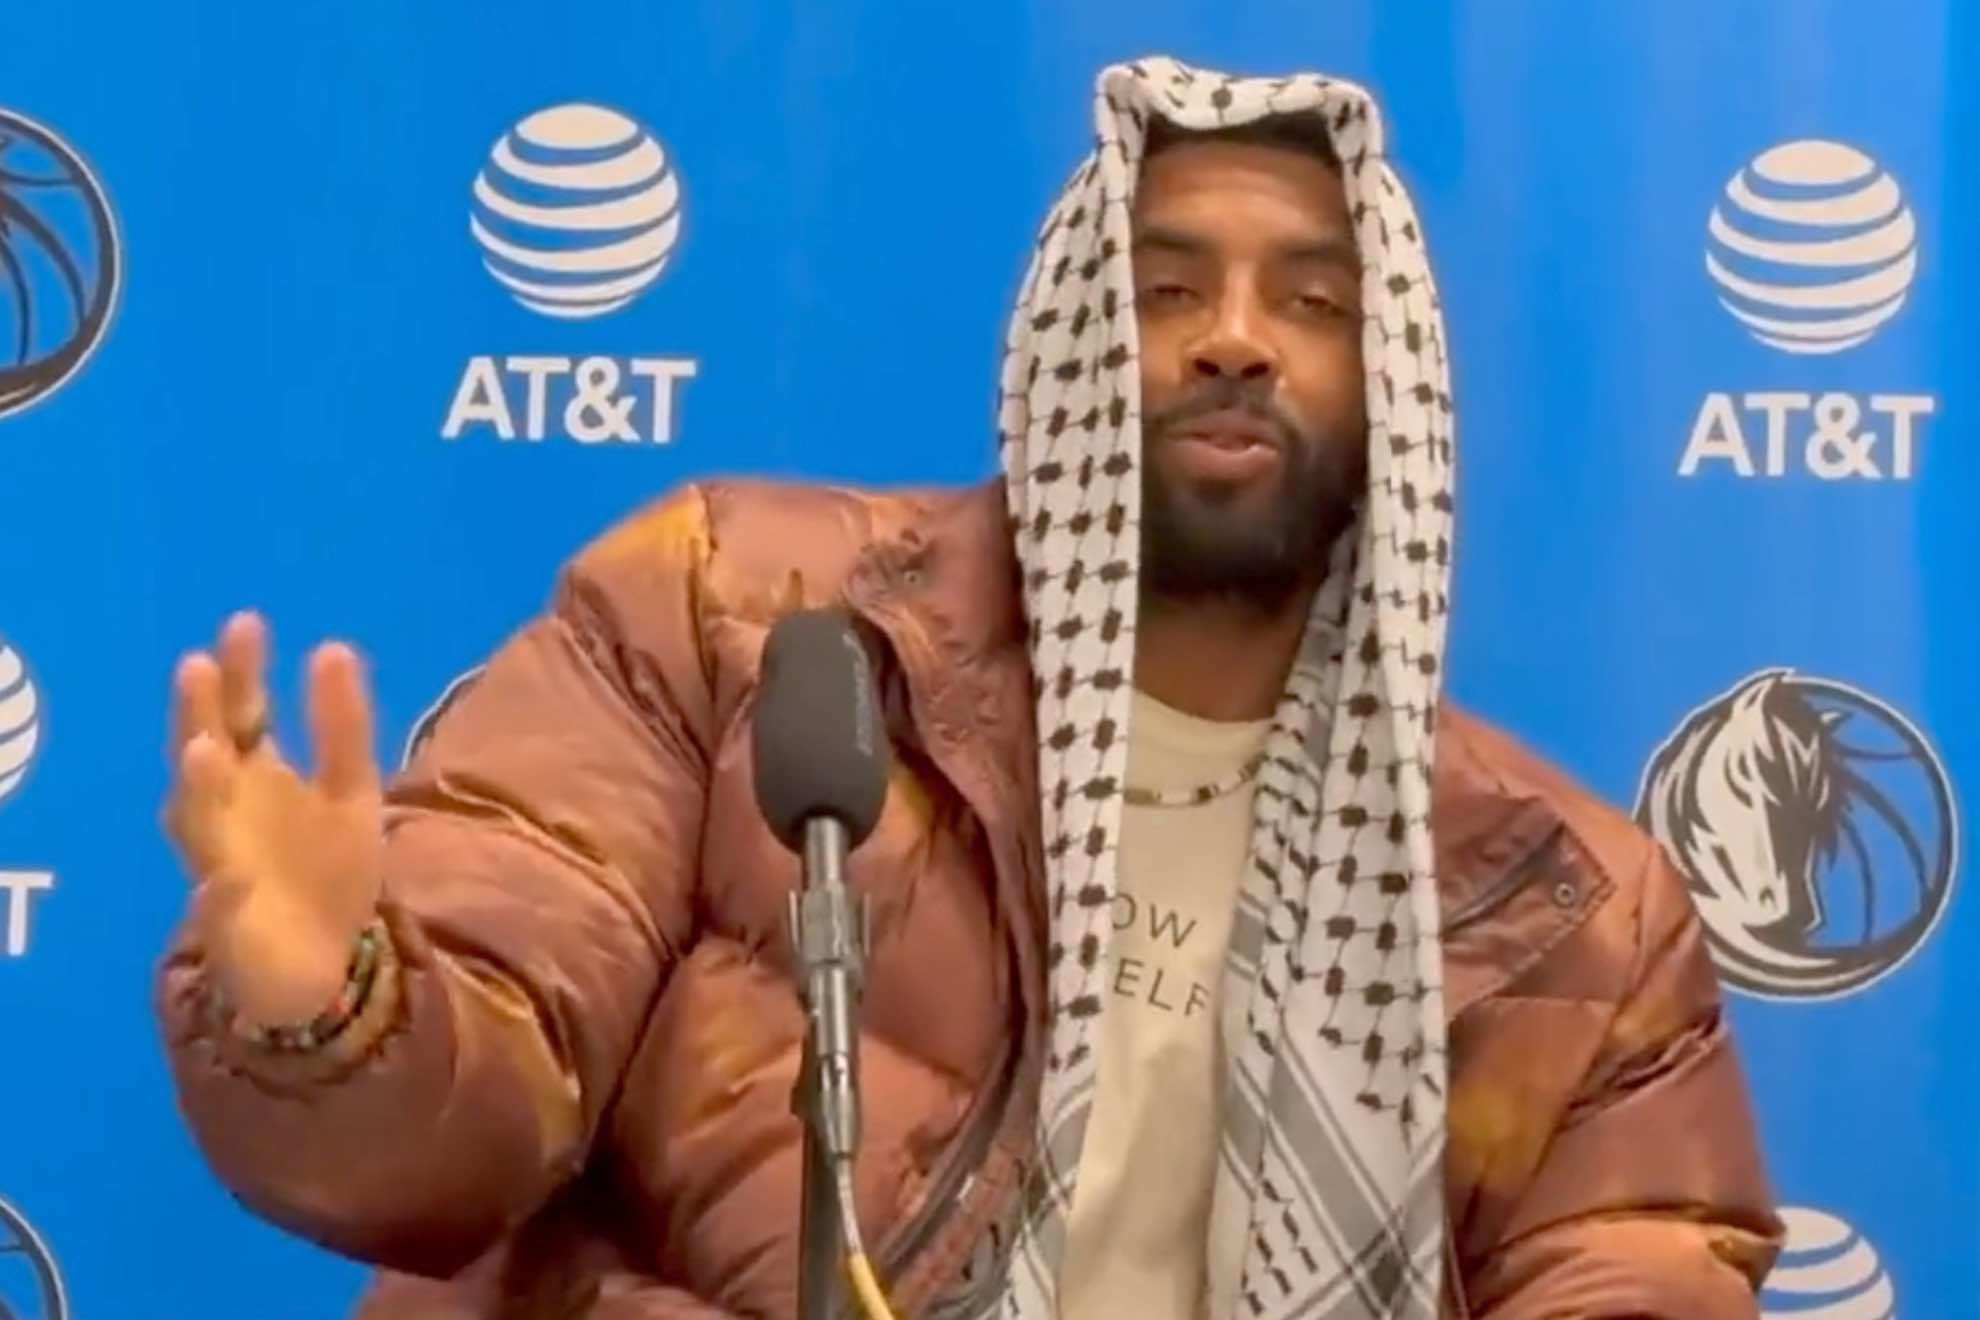 Kyrie Irving polarizes NBA fans by wearing keffiyeh, openly showing support for Palestine